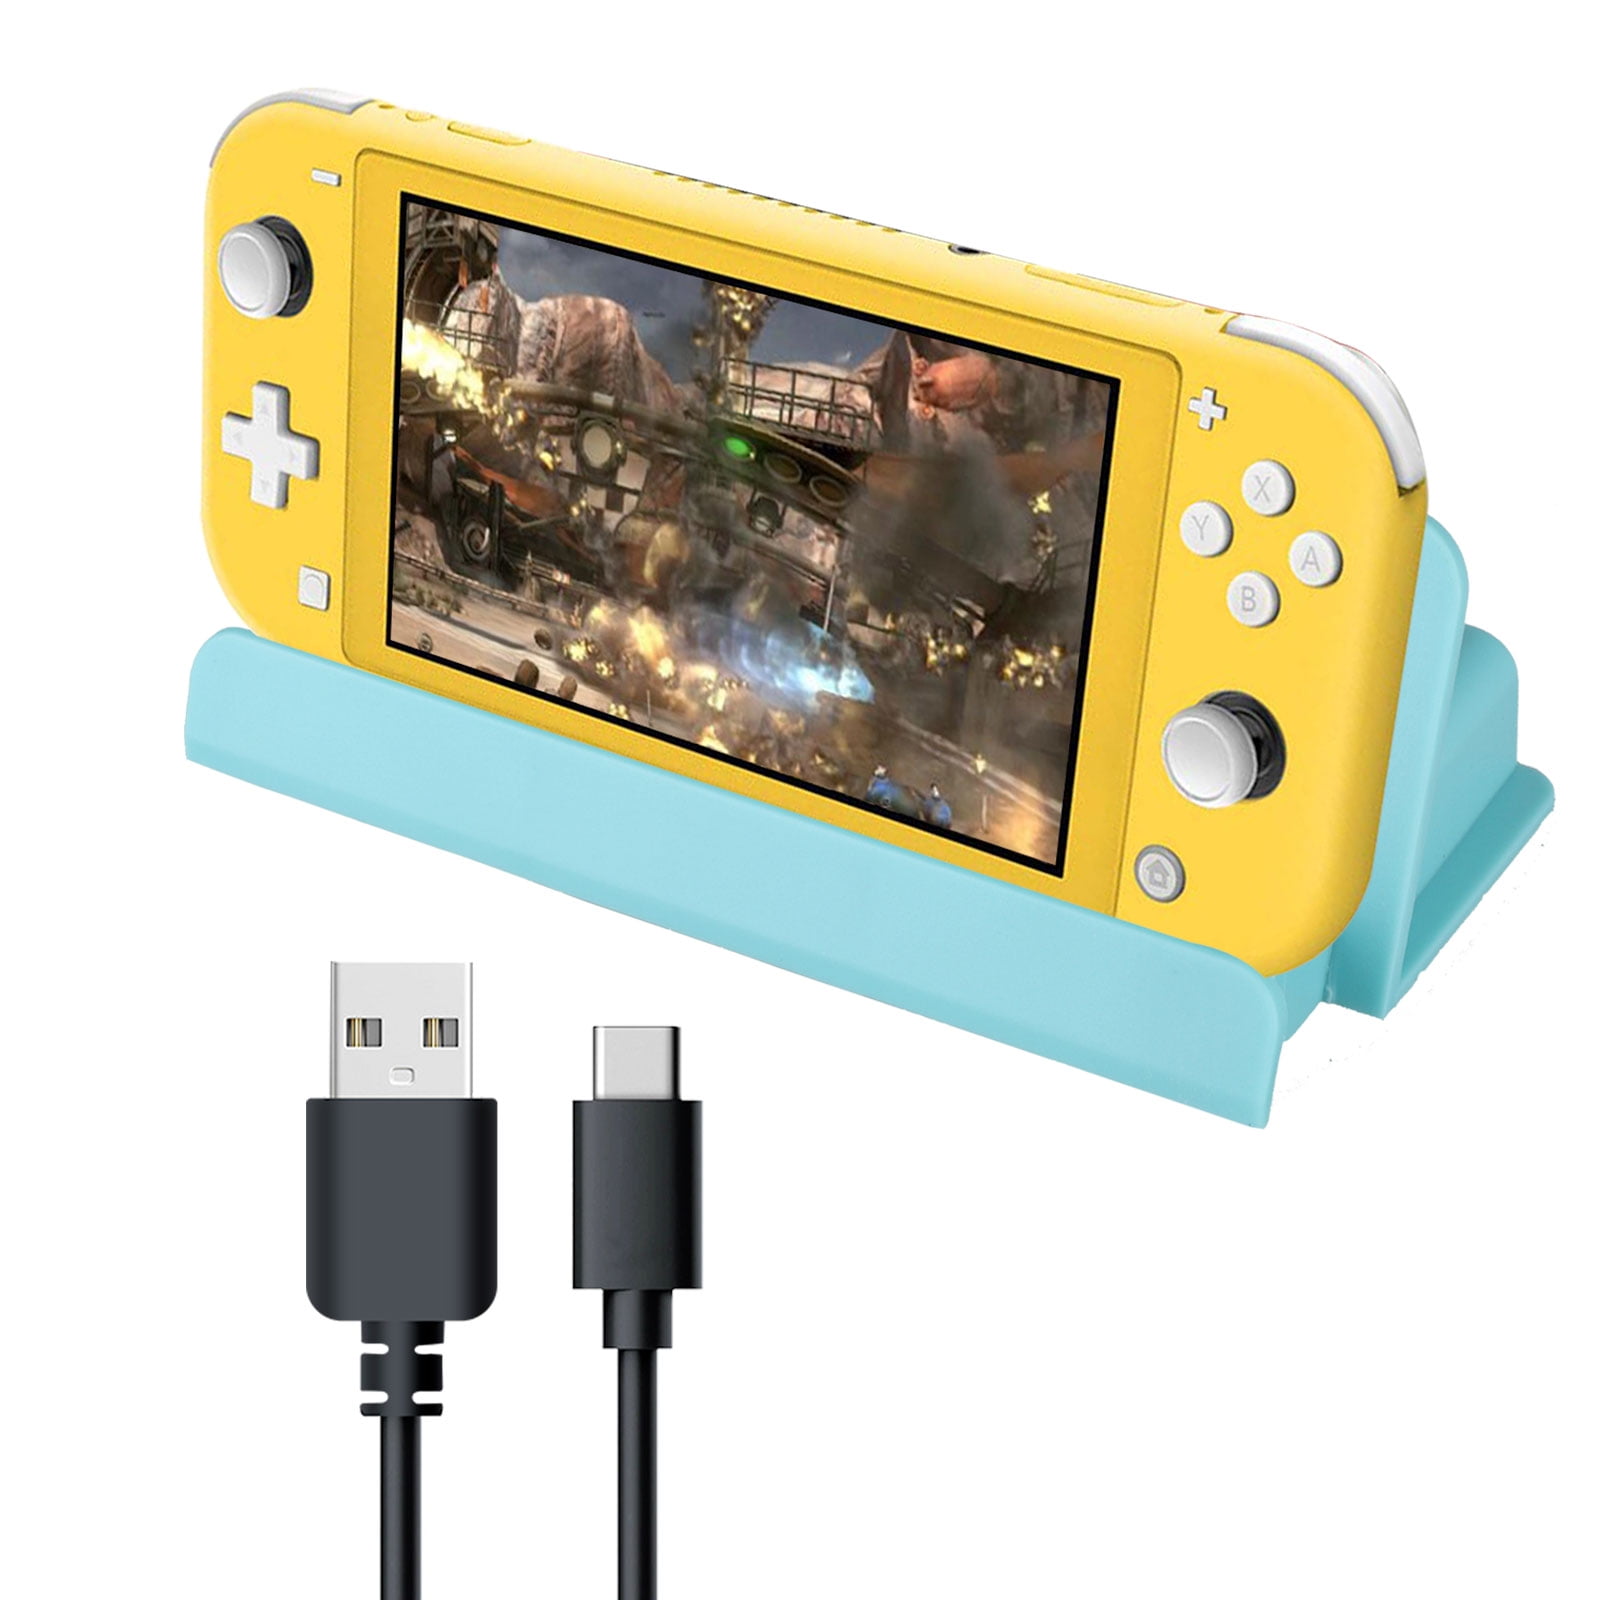 nintendo switch lite usb charger